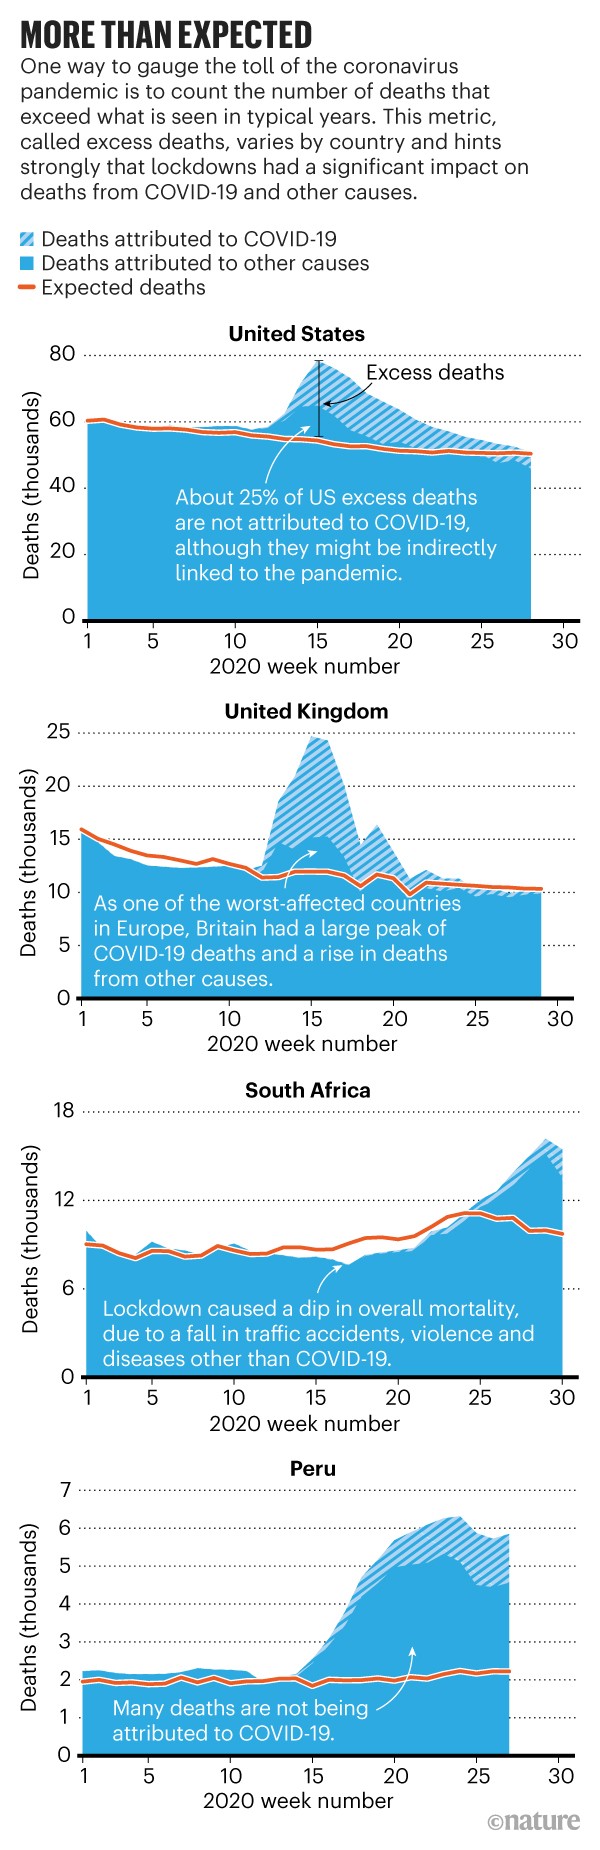 Infographic: More than expected. Four charts comparing the expected and actual deaths rates in four large countries.